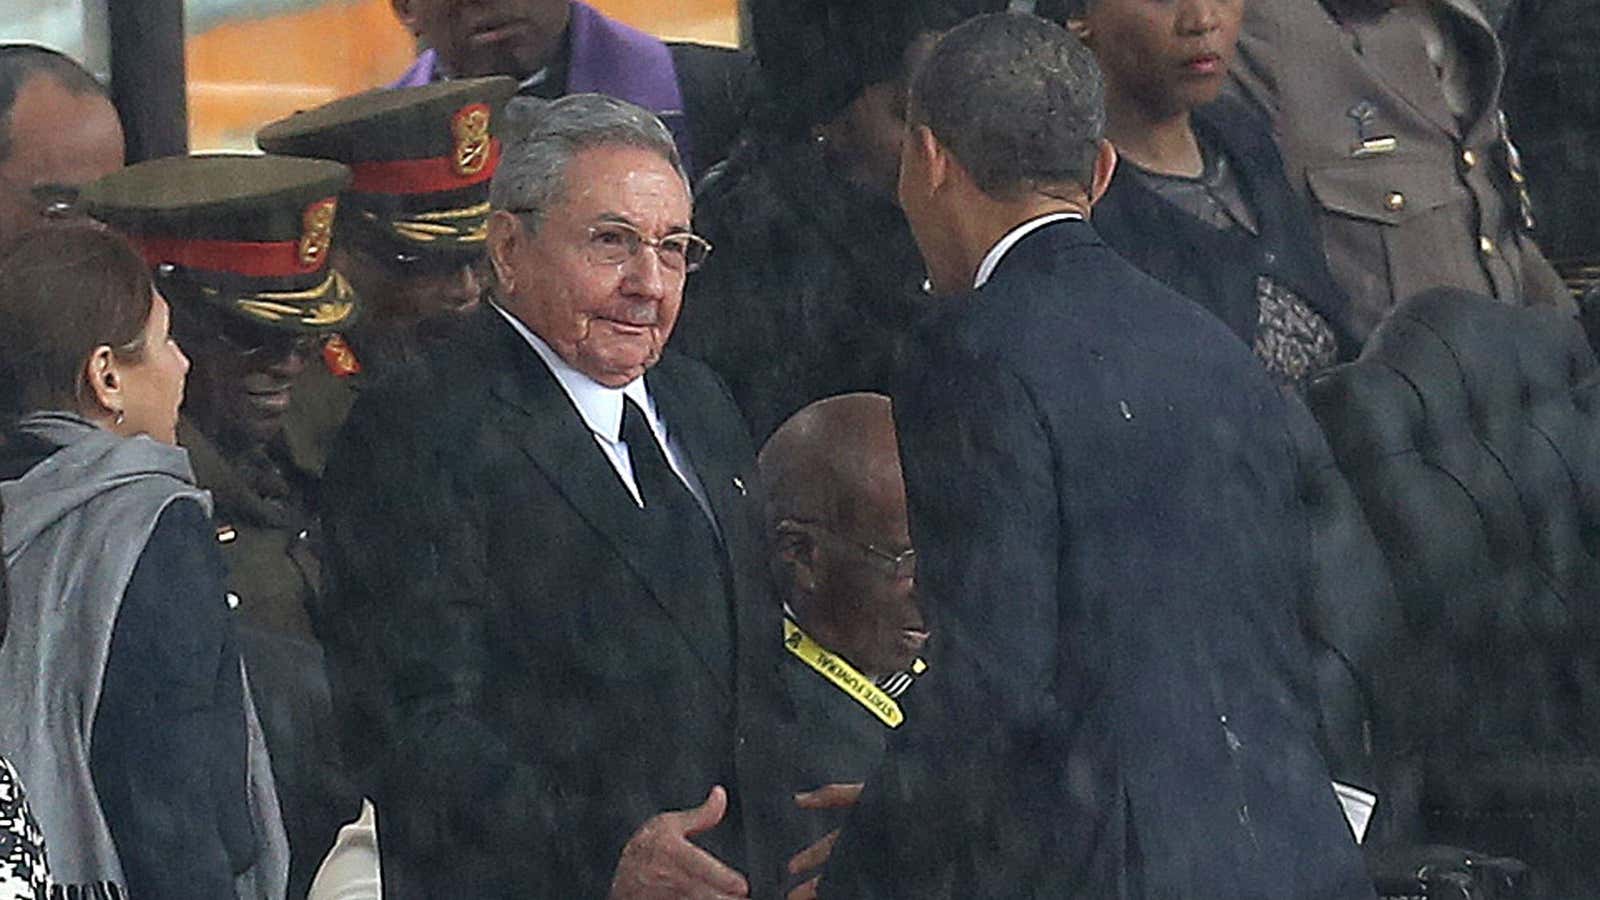 Raul Castro and Barack Obama shake hands at Nelson Mandela’s funeral.